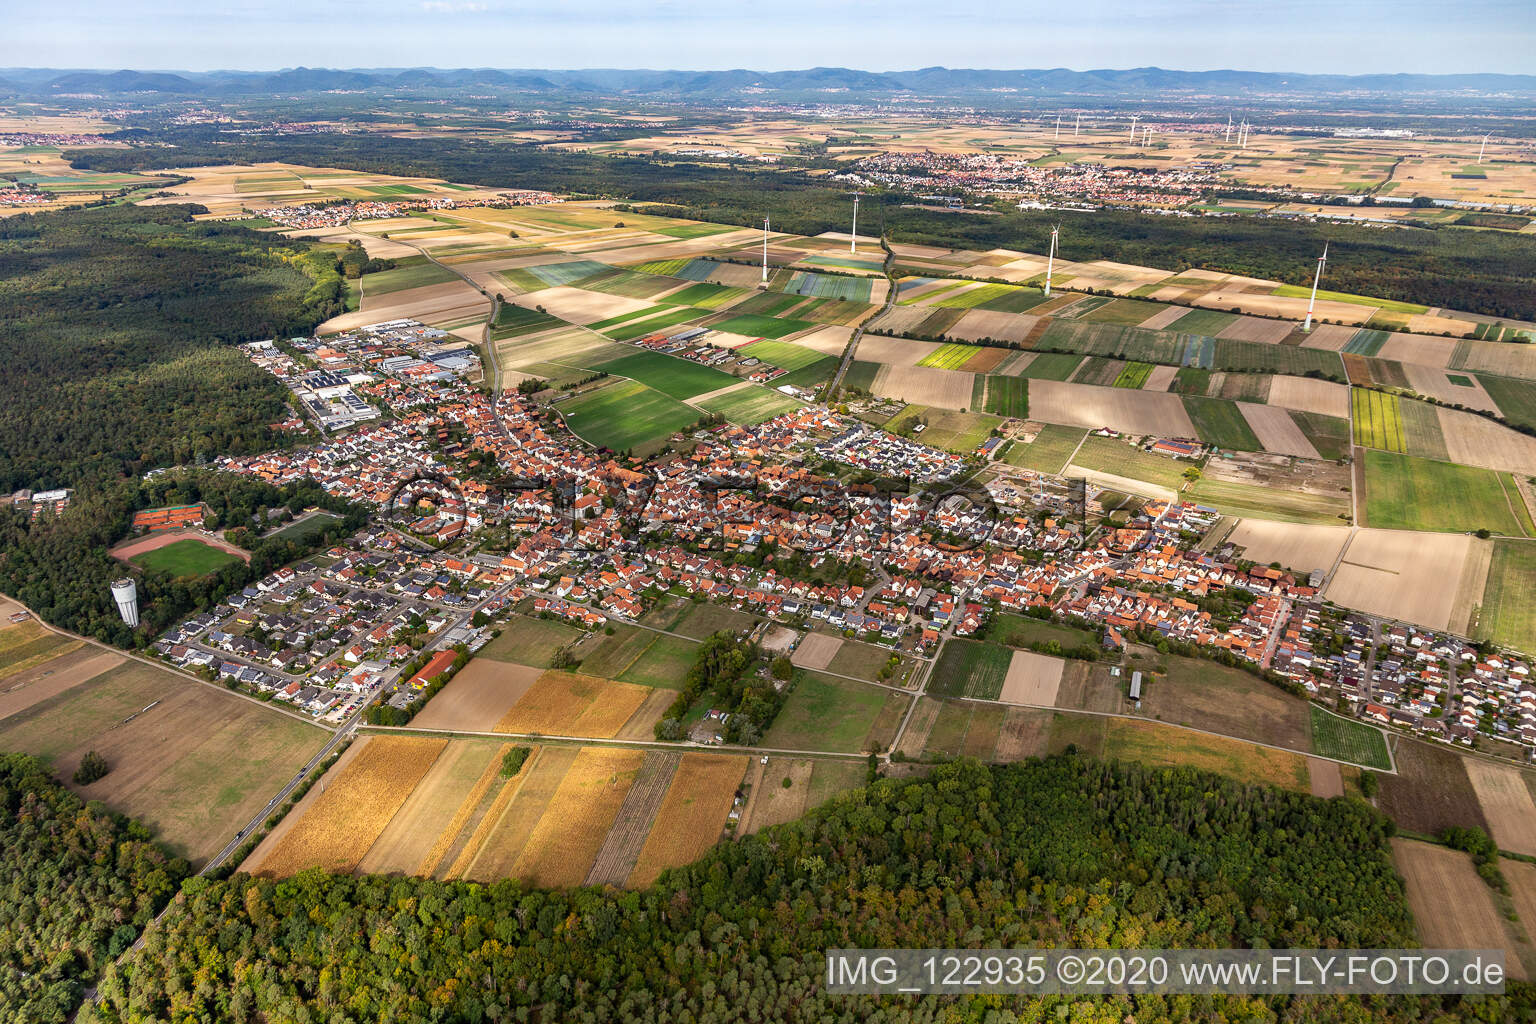 Aerial view of Village view on the edge of agricultural fields and land in Hatzenbuehl in the state Rhineland-Palatinate, Germany